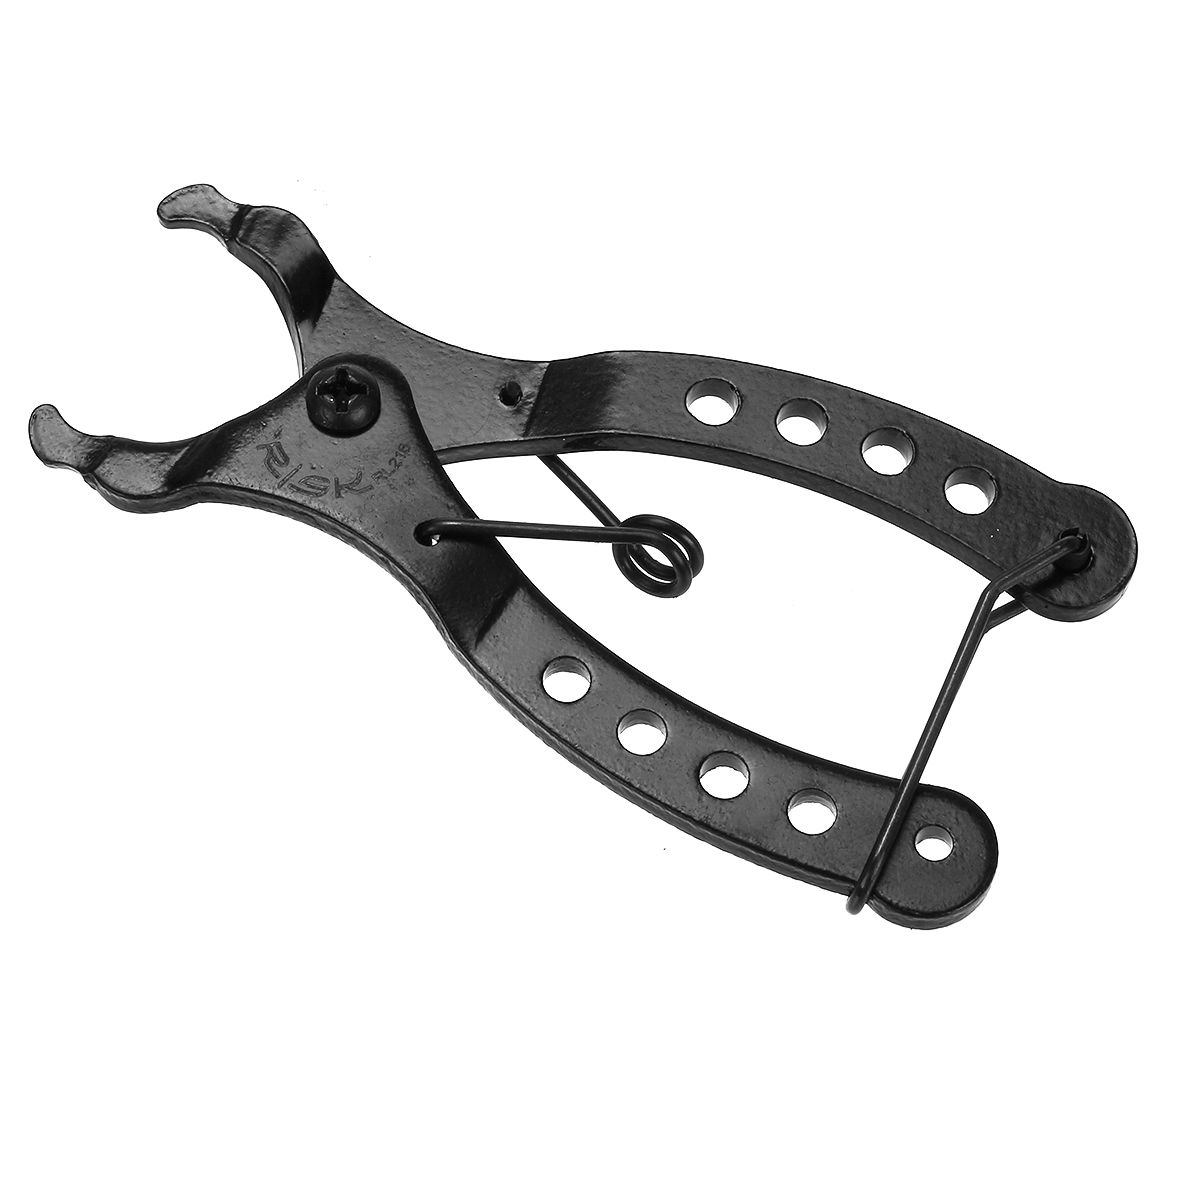 Mini-Chain-Quick-Link-Tool-Bicycle-Plier-Mountain-Bike-Chains-Clamp-Buckle-1749898